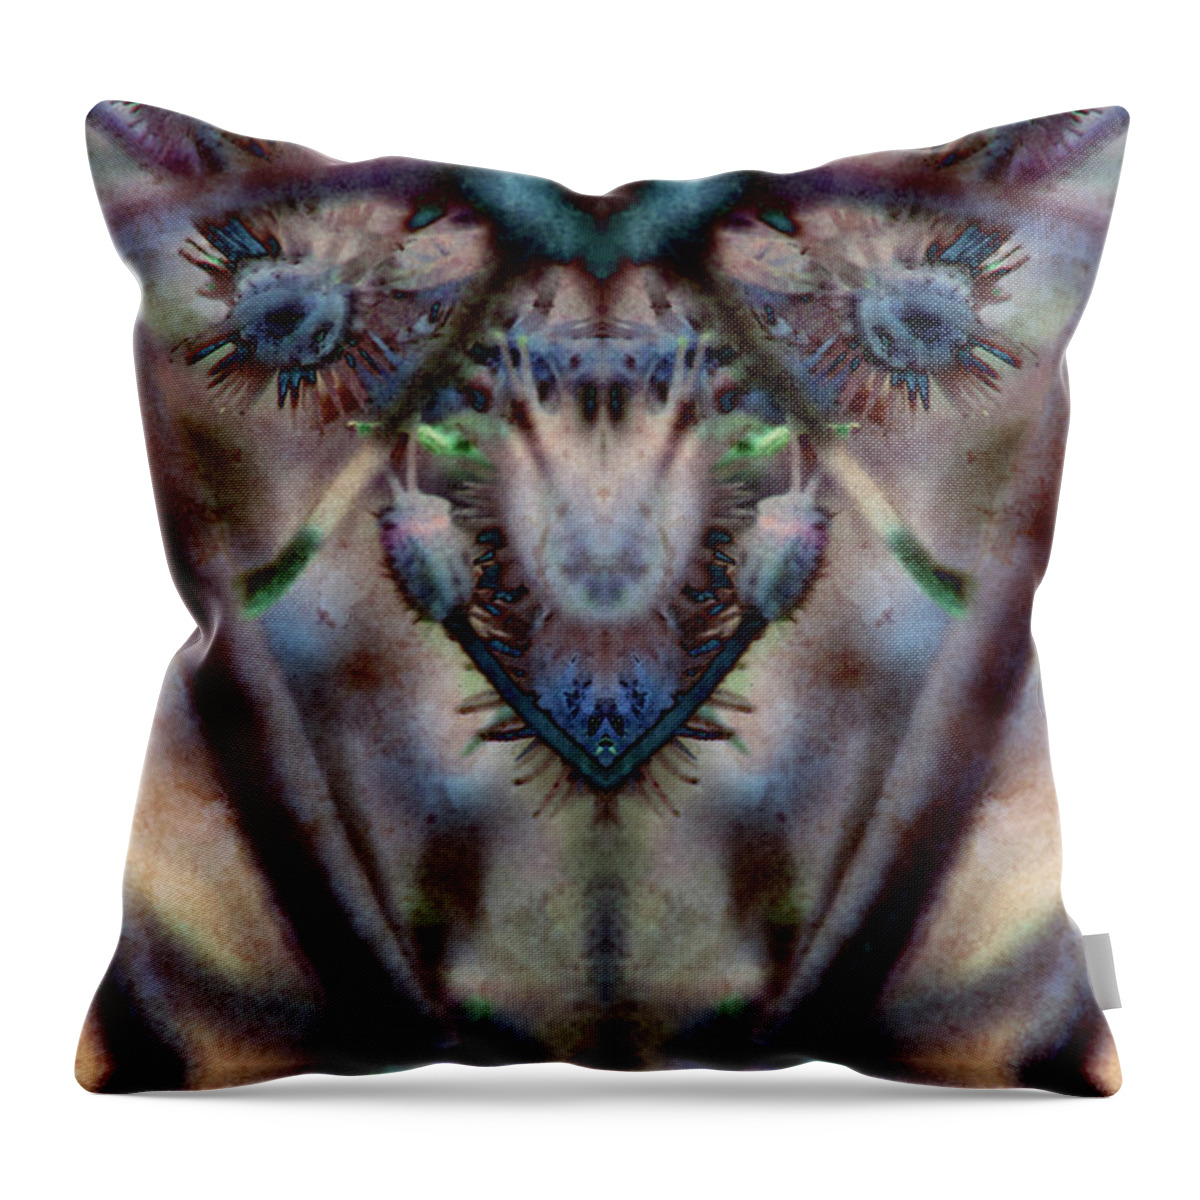 Monsters Throw Pillow featuring the digital art Under The Bed by WB Johnston